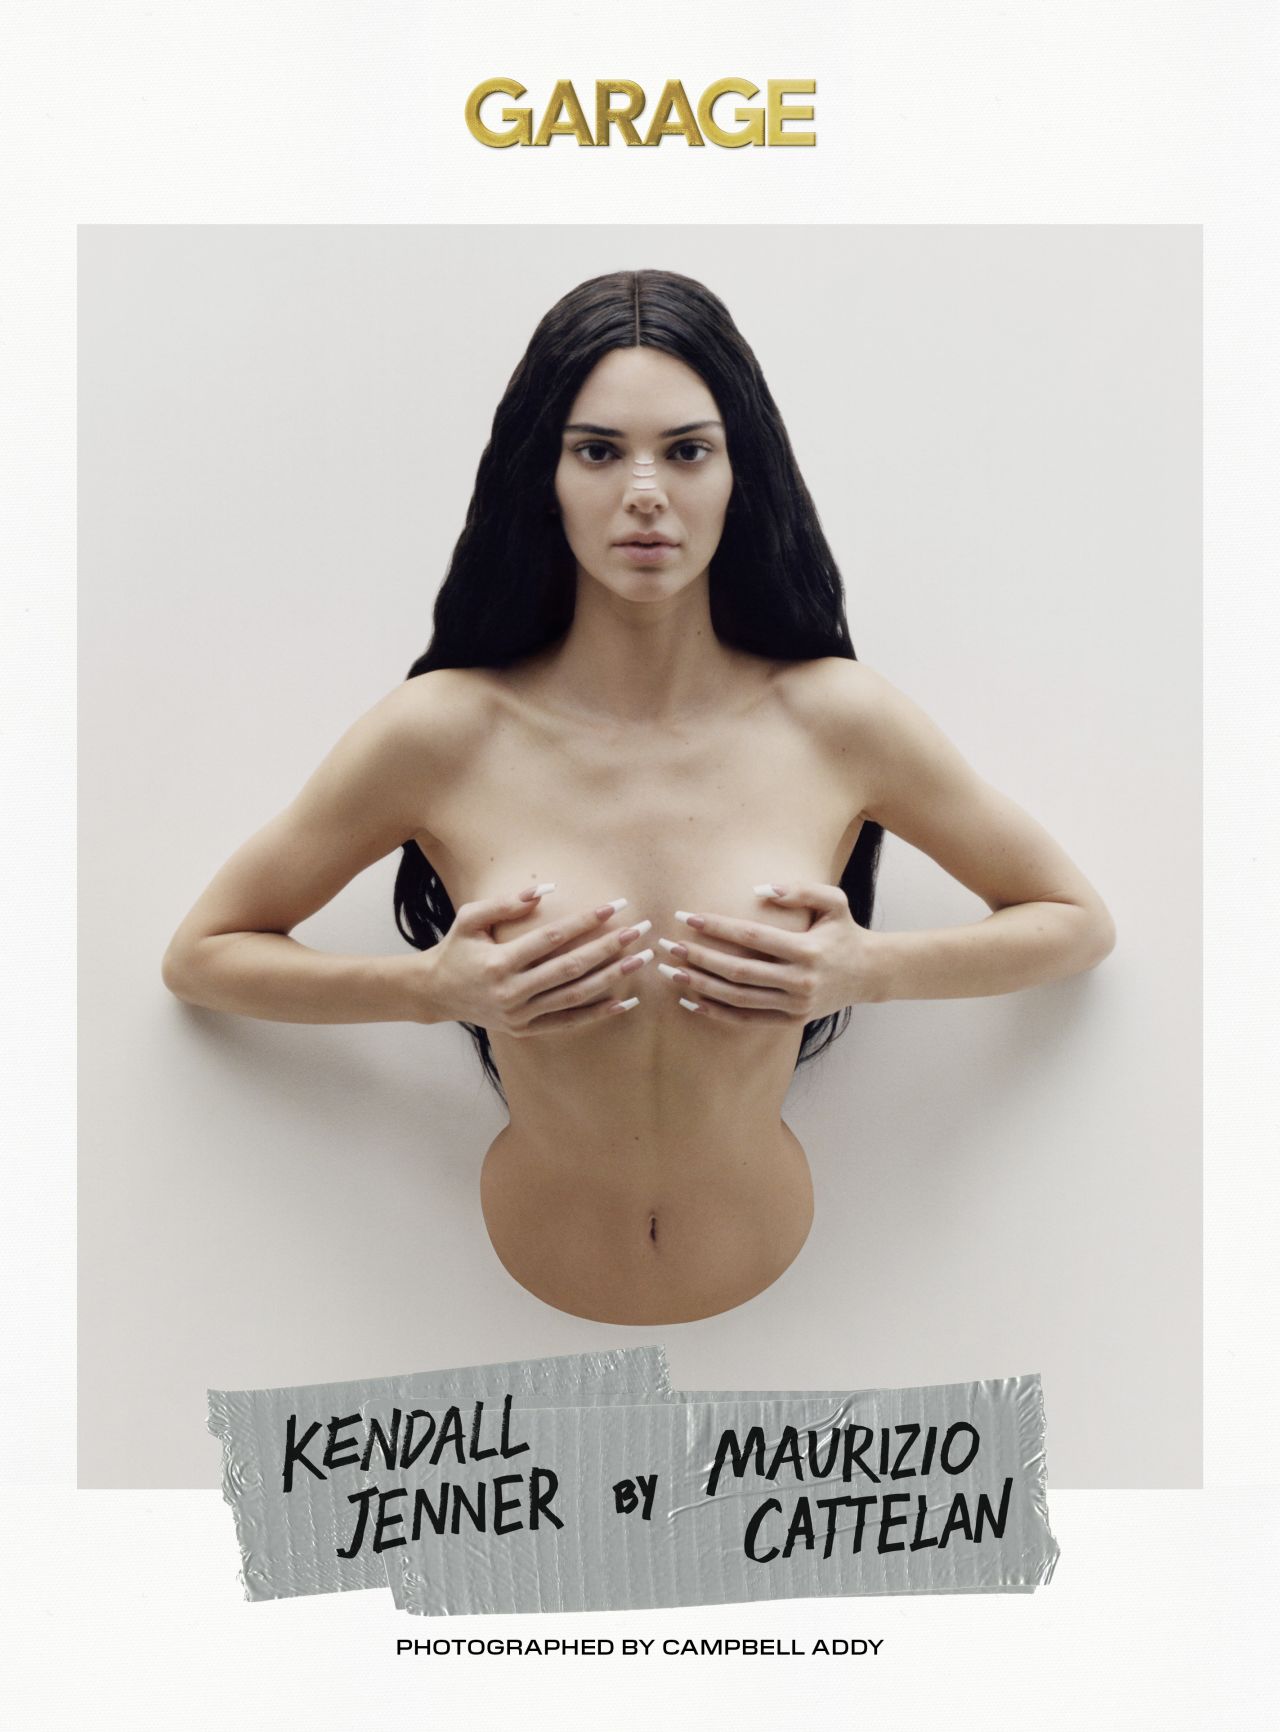 Kendall Jenner - Kendall Jenner photographed as topless wax model by banana art provocateur  | CNN